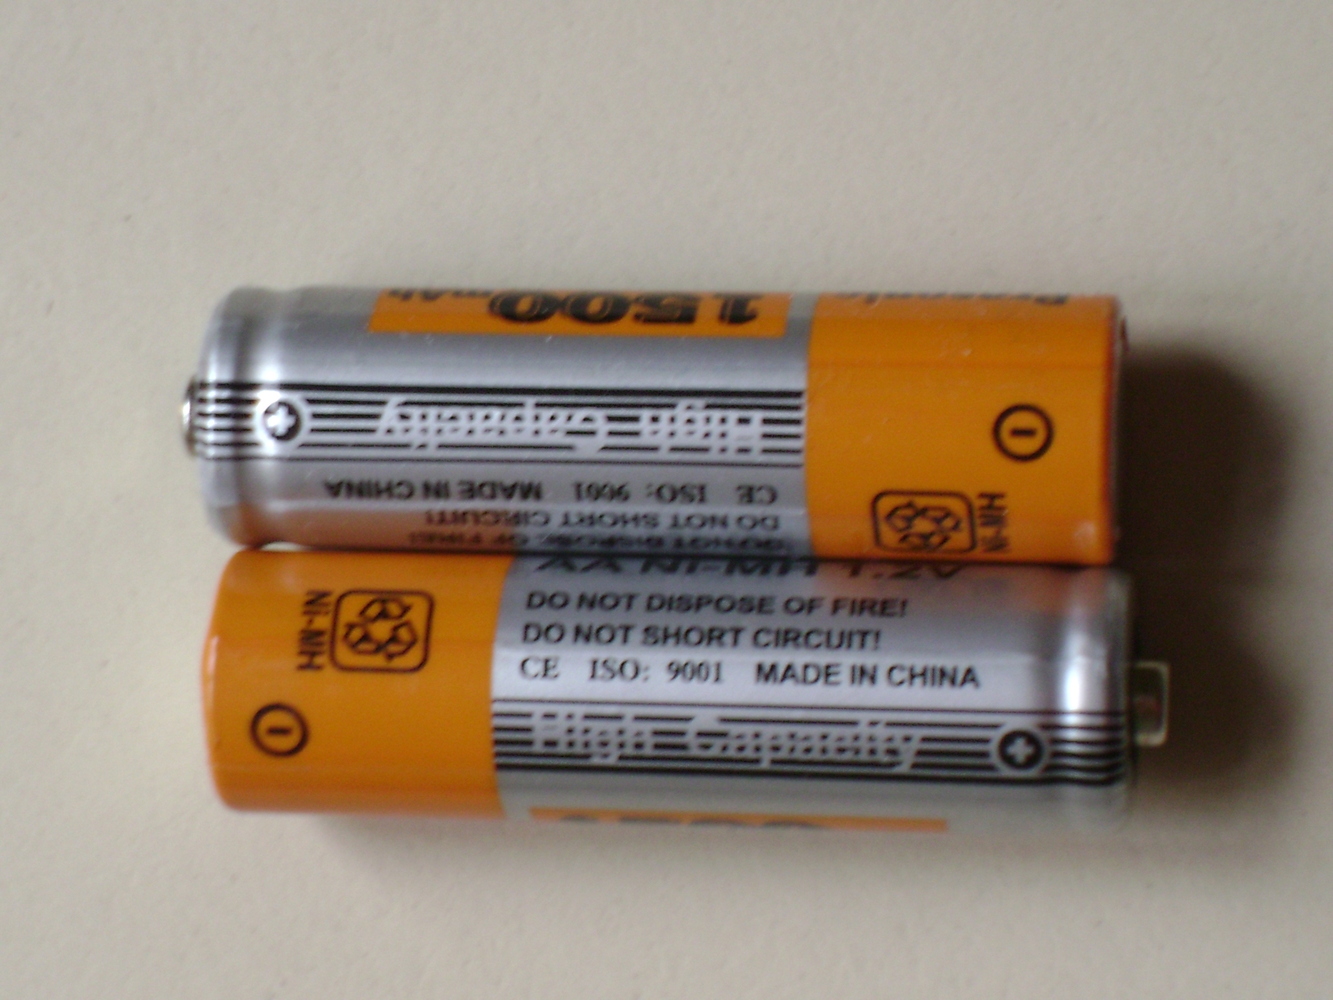 Picture of rechargeable batteries.